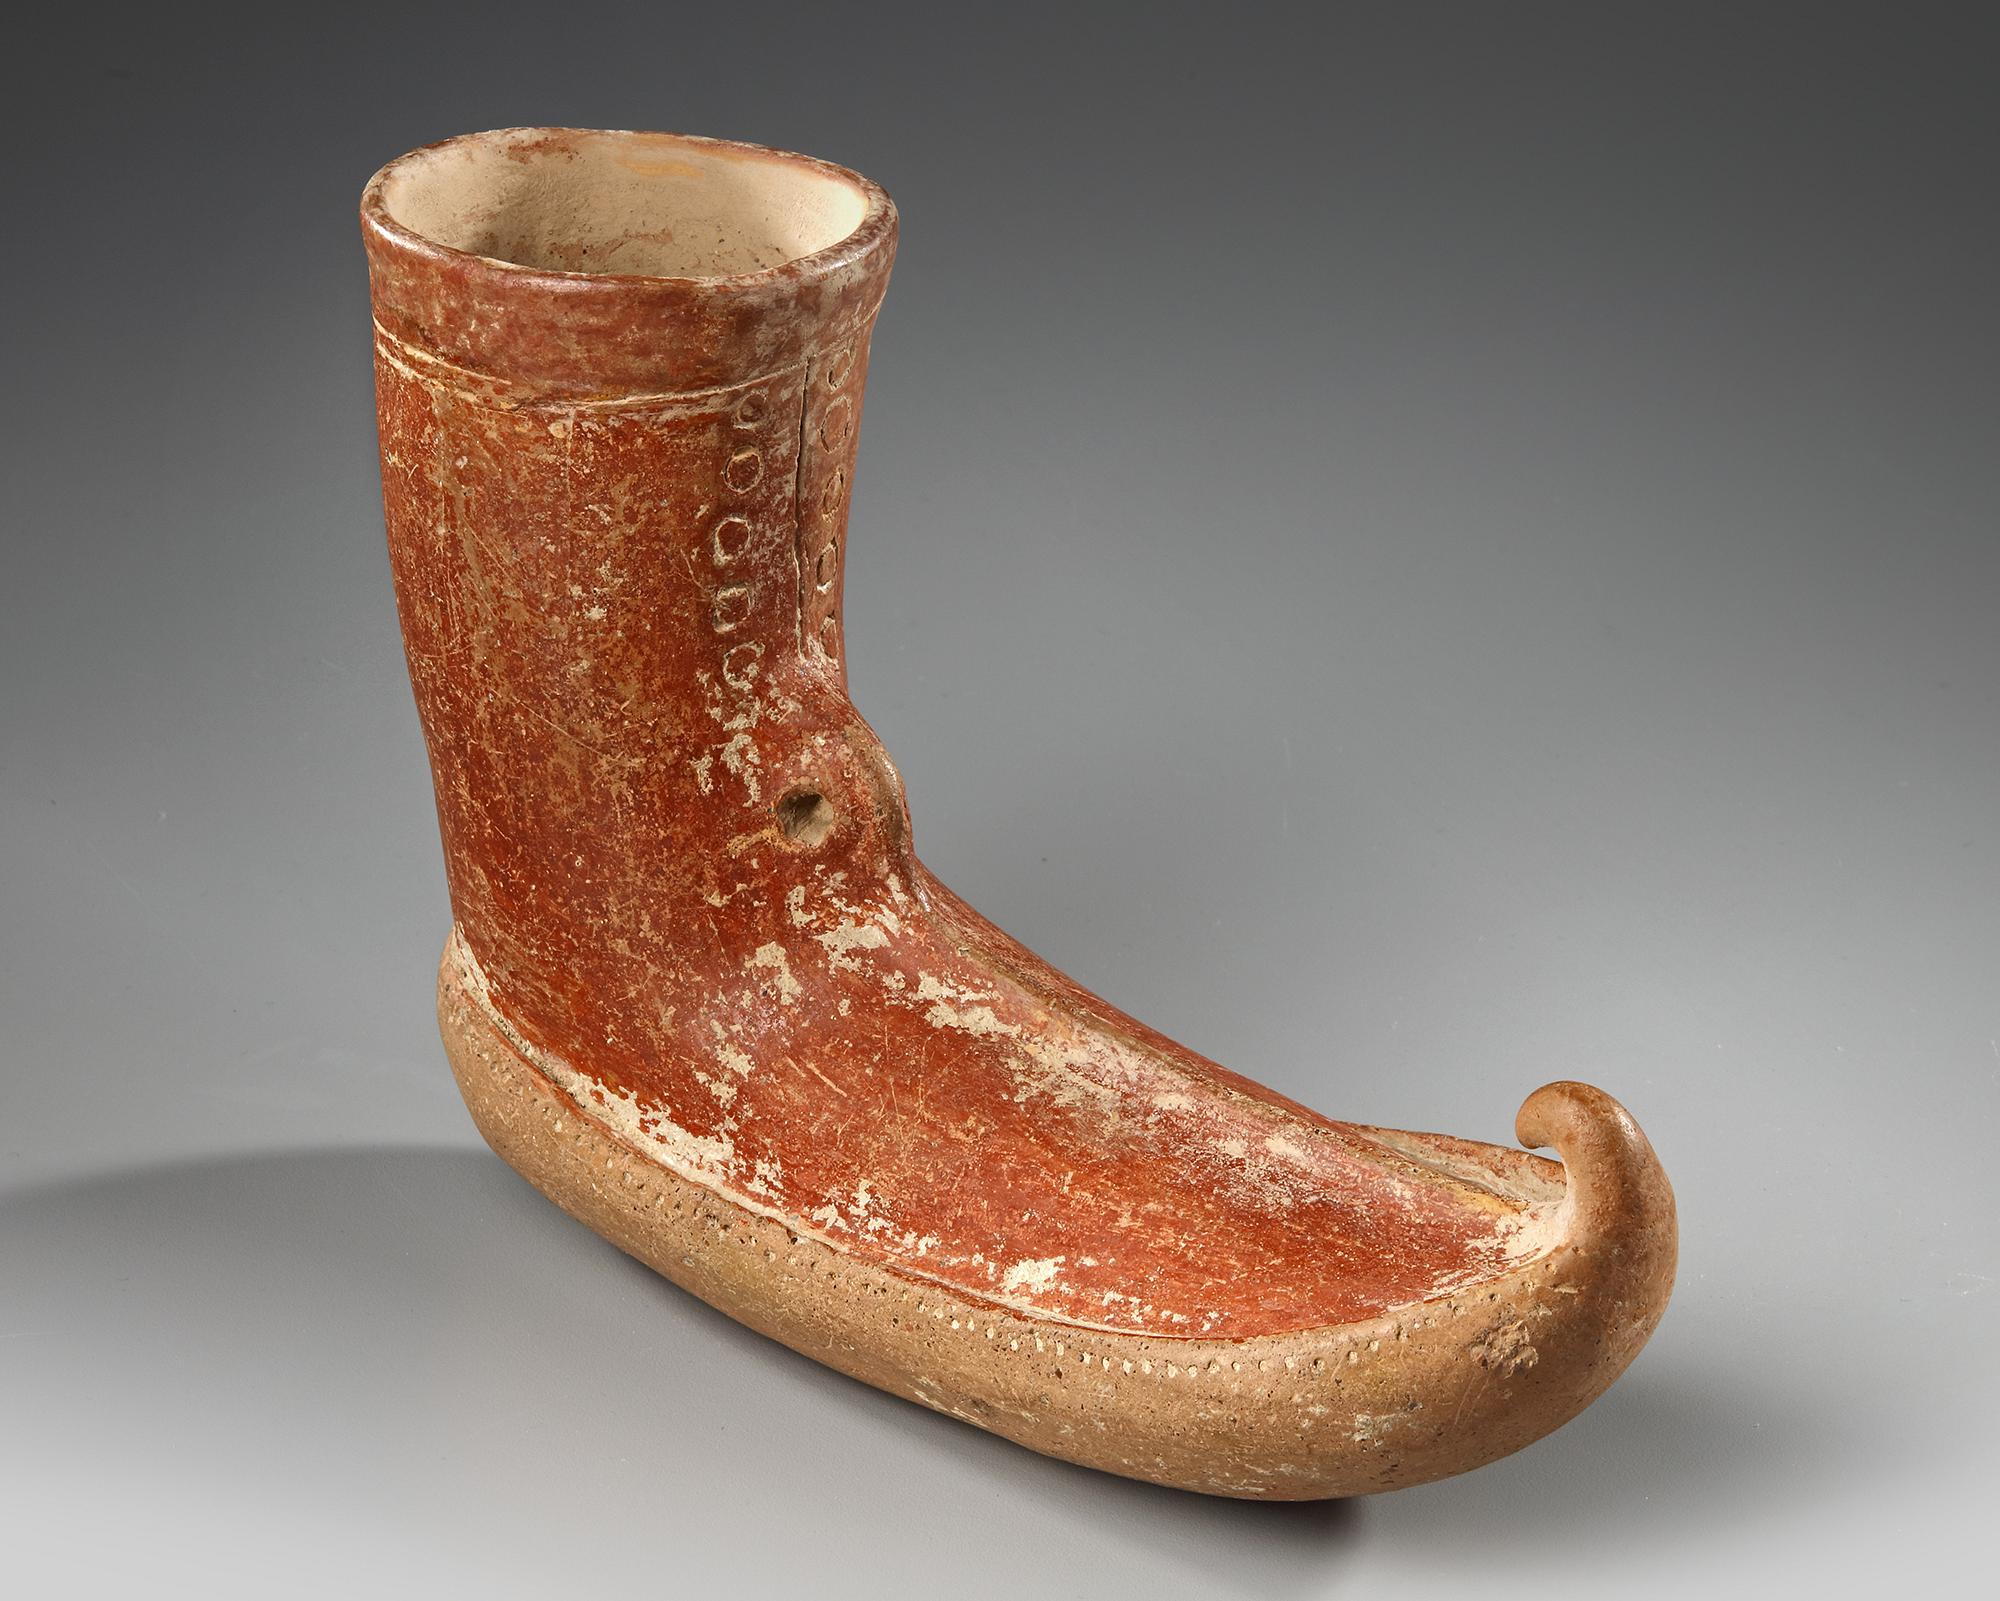 AN AMLASH RHYTON POTTERY IN FORM OF SHOES, CIRCA 1ST MILLENNIUM B.C. - Image 3 of 5